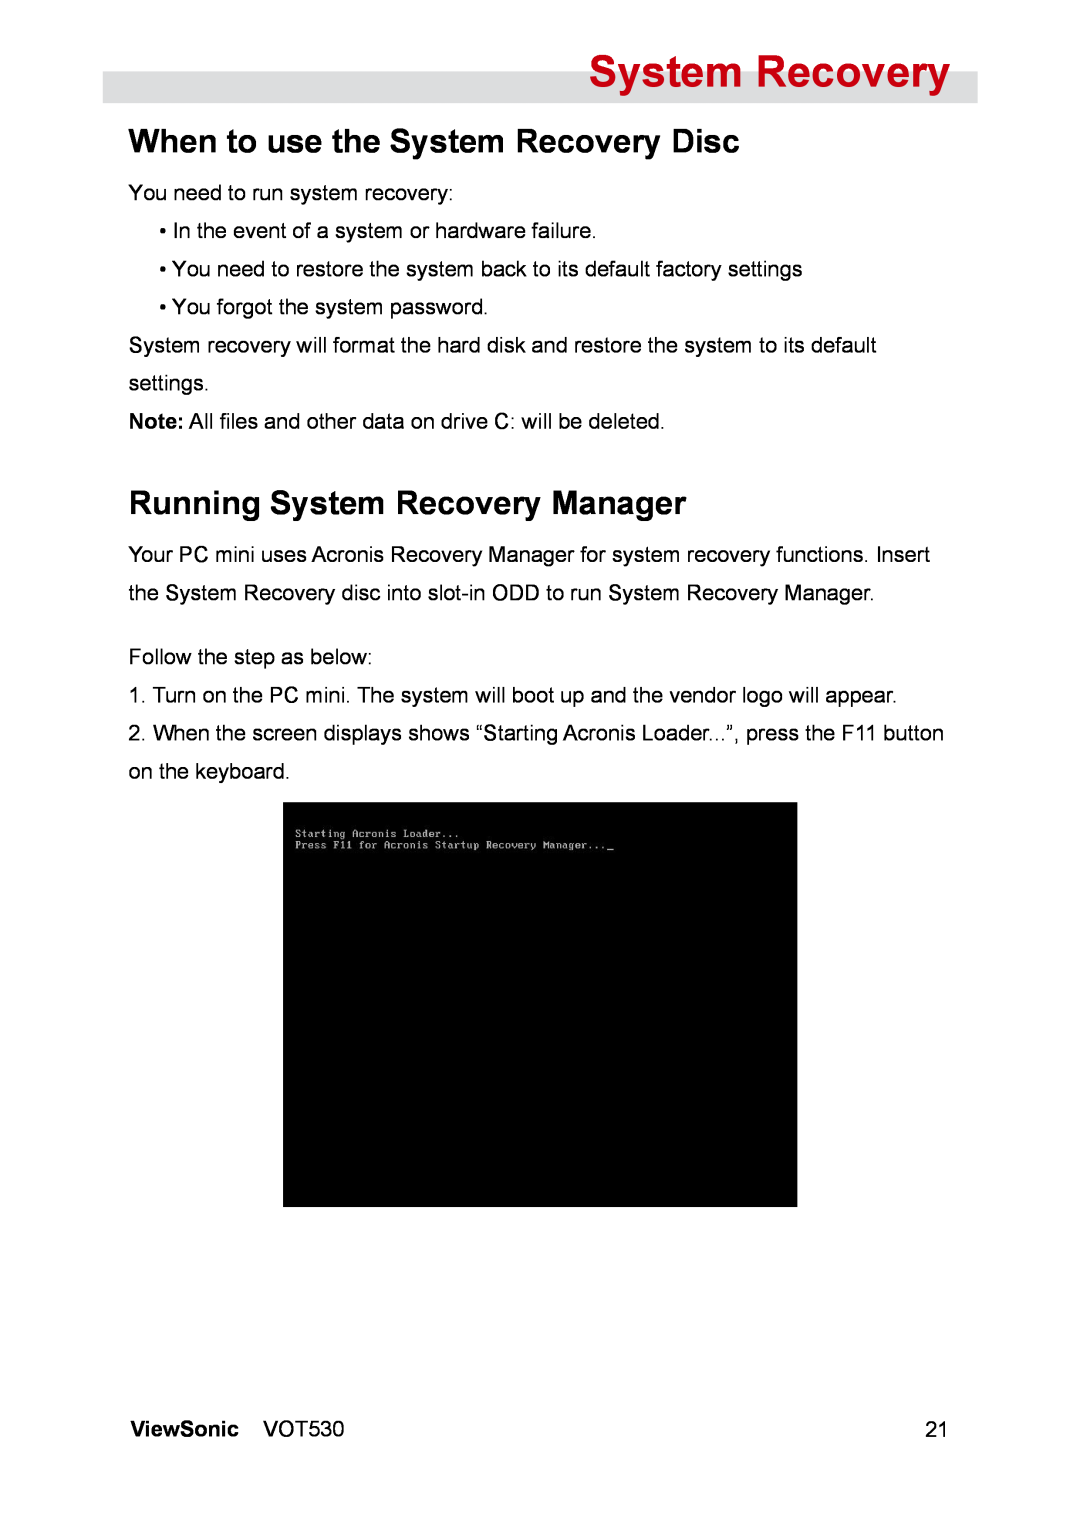 ViewSonic VS12661 manual When to use the System Recovery Disc, Running System Recovery Manager, ViewSonic VOT530 